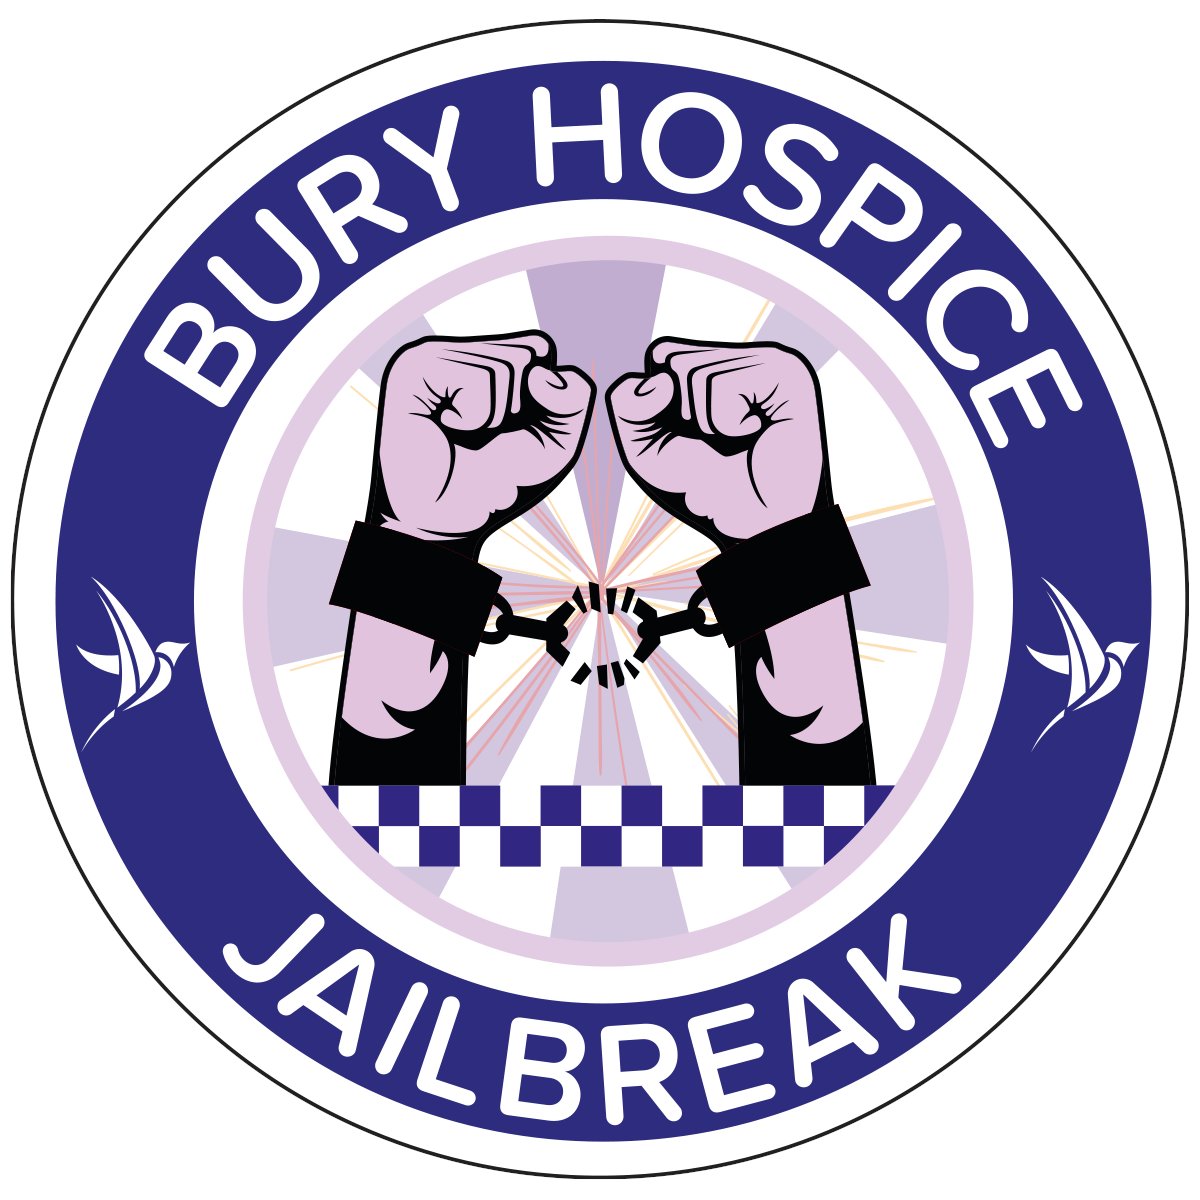 Thank you to all the nominated bosses for willingly participating in Bury Hospice's first Jailbreak event on Friday. Will they raise the required funds to break free? Head here to find out more: buryhospice.org.uk/events/jail-br… To donate, please head here: justgiving.com/campaign/jailb…